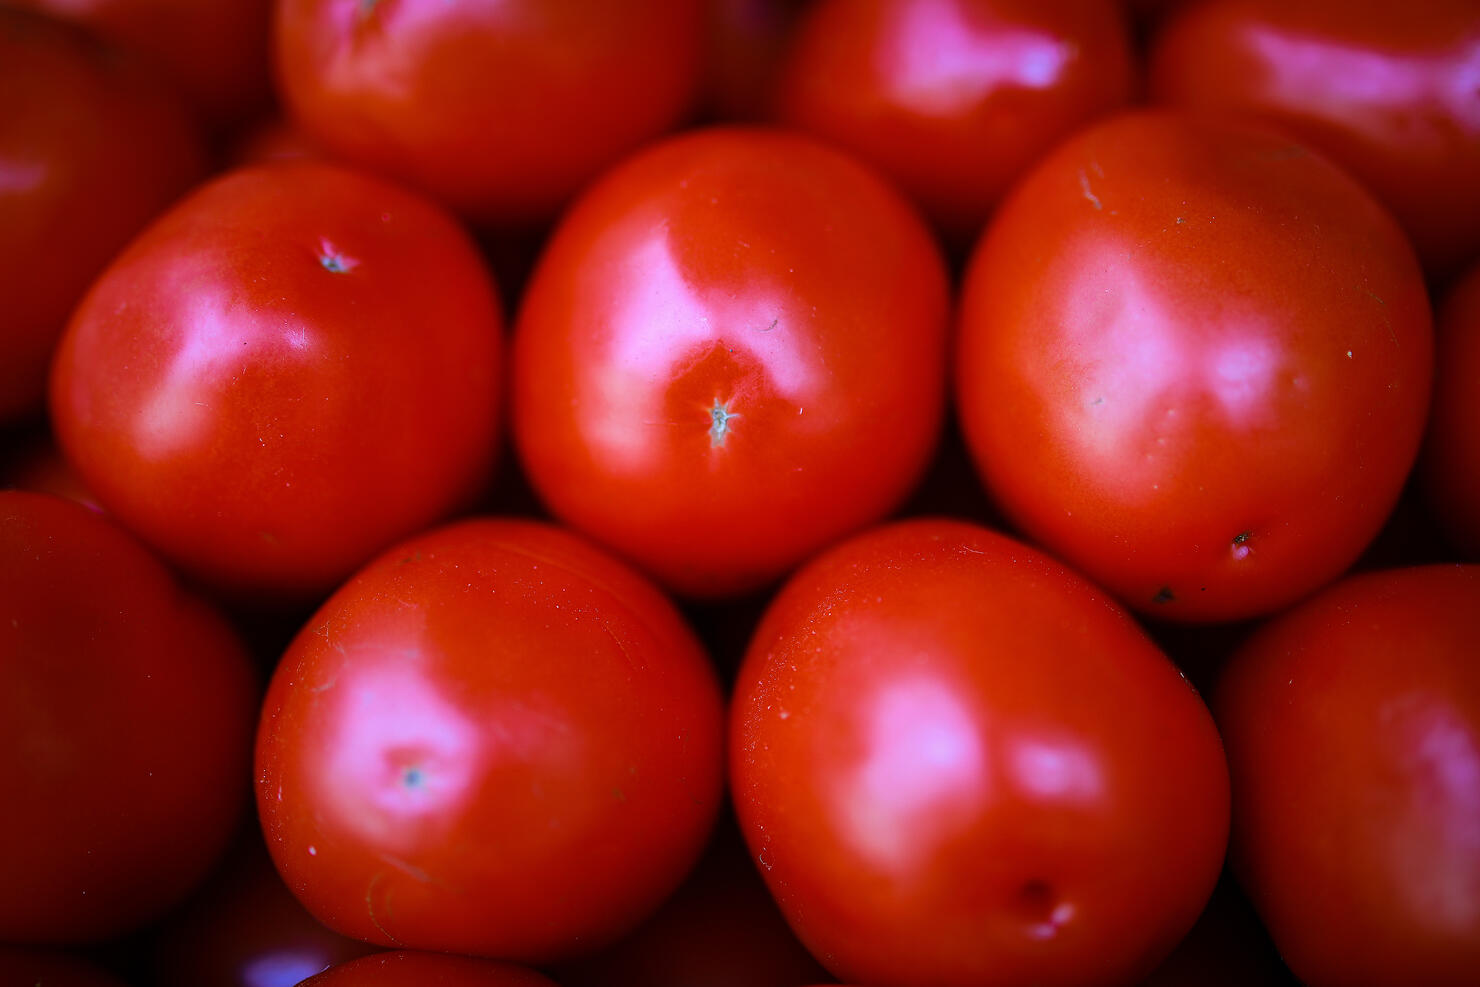 United States Imposes New Tariff On Mexican Tomato Imports